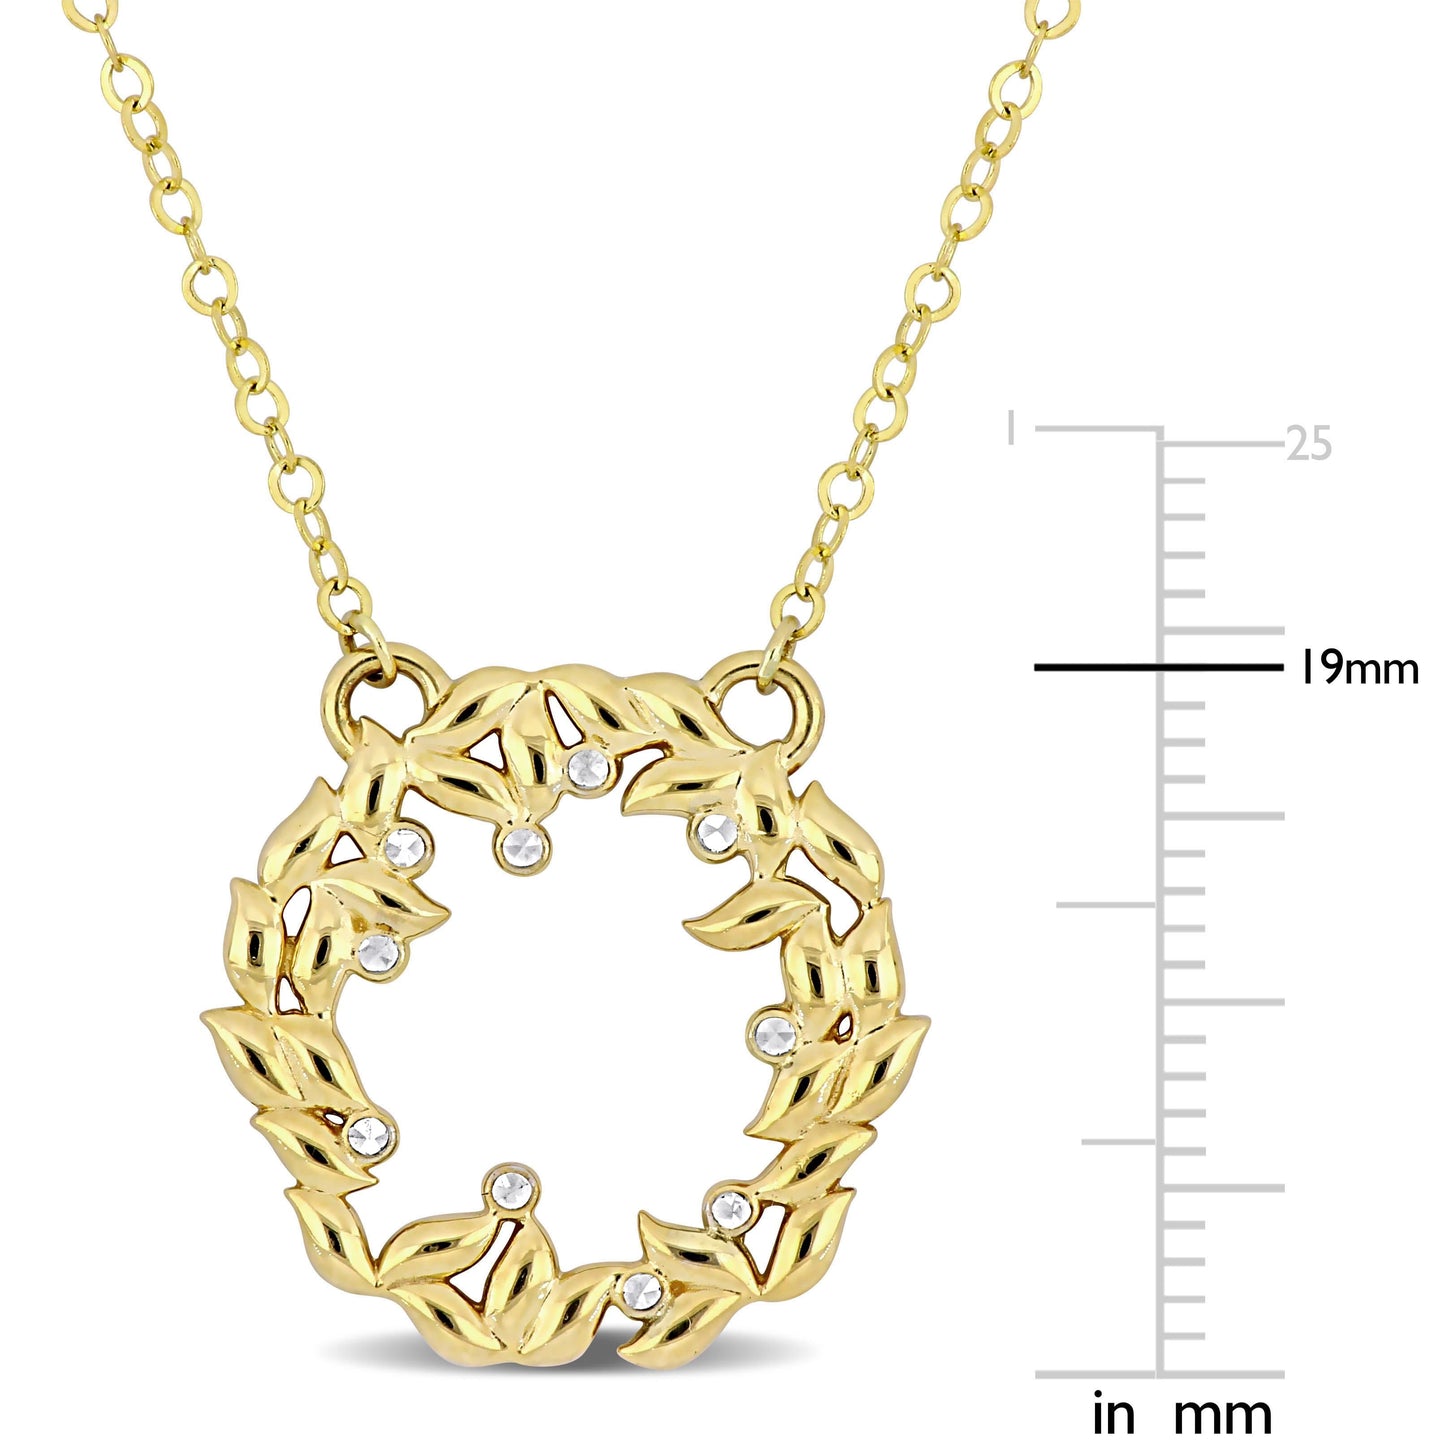 10k Yellow Gold Wreath Necklace